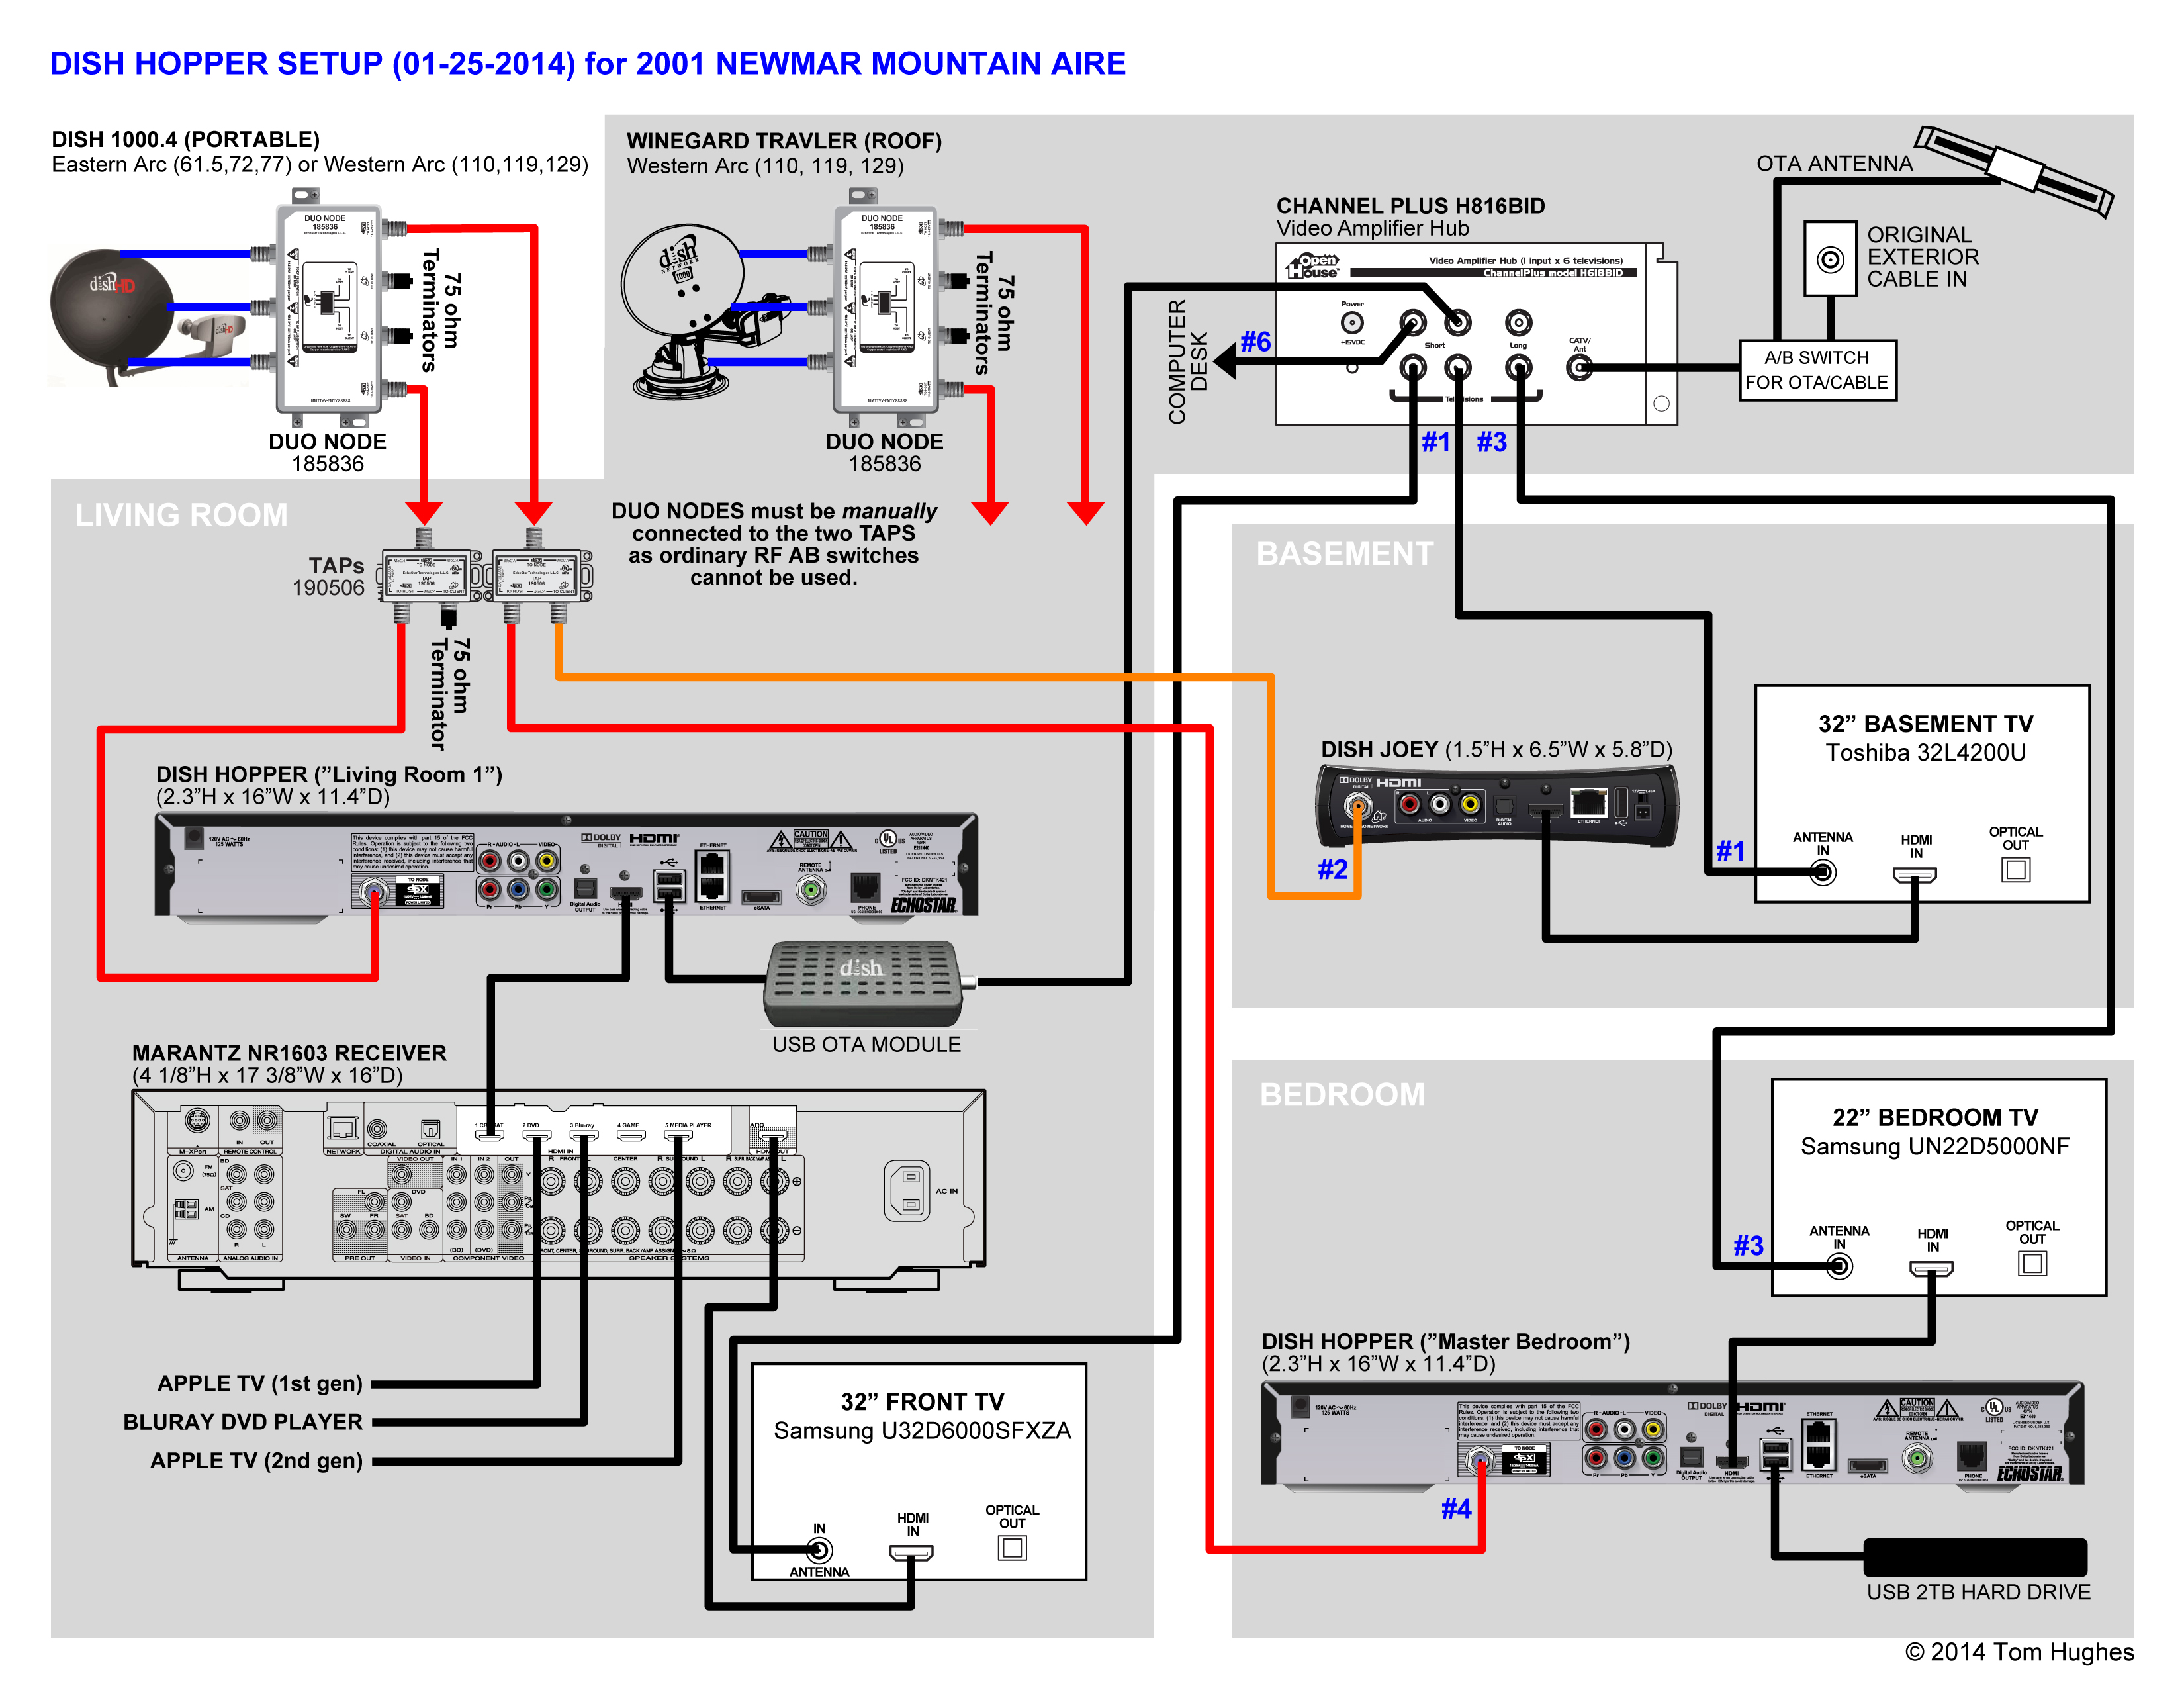 Wiring Diagram For Dish Network Wally dish network receiver wiring diagram 